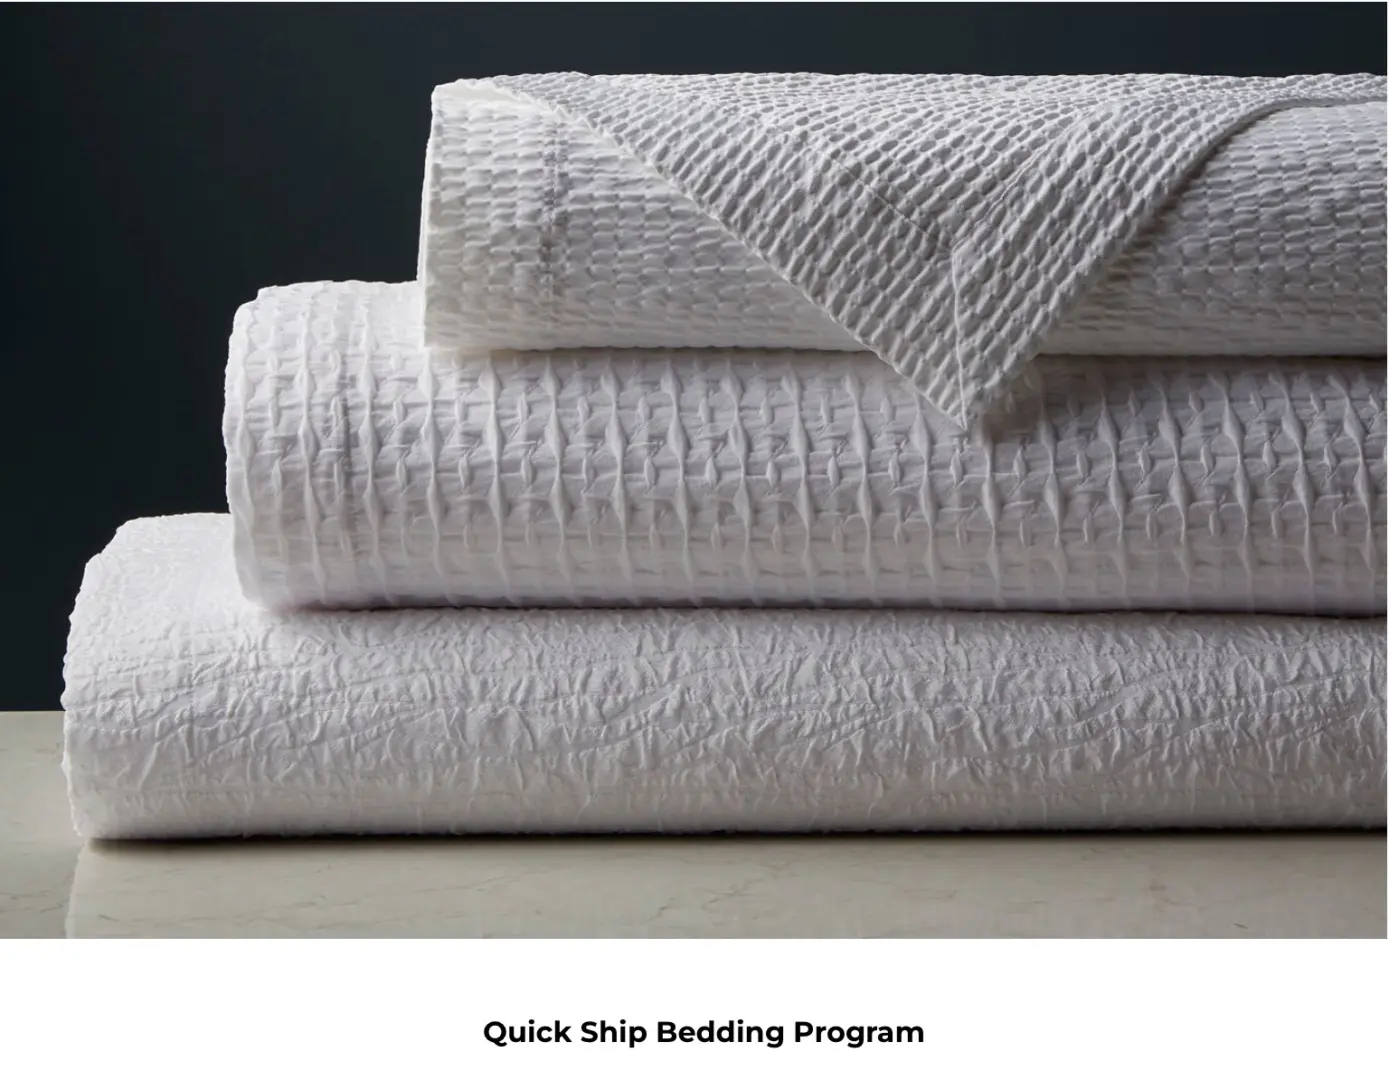 A Bunch of White Folded Towels